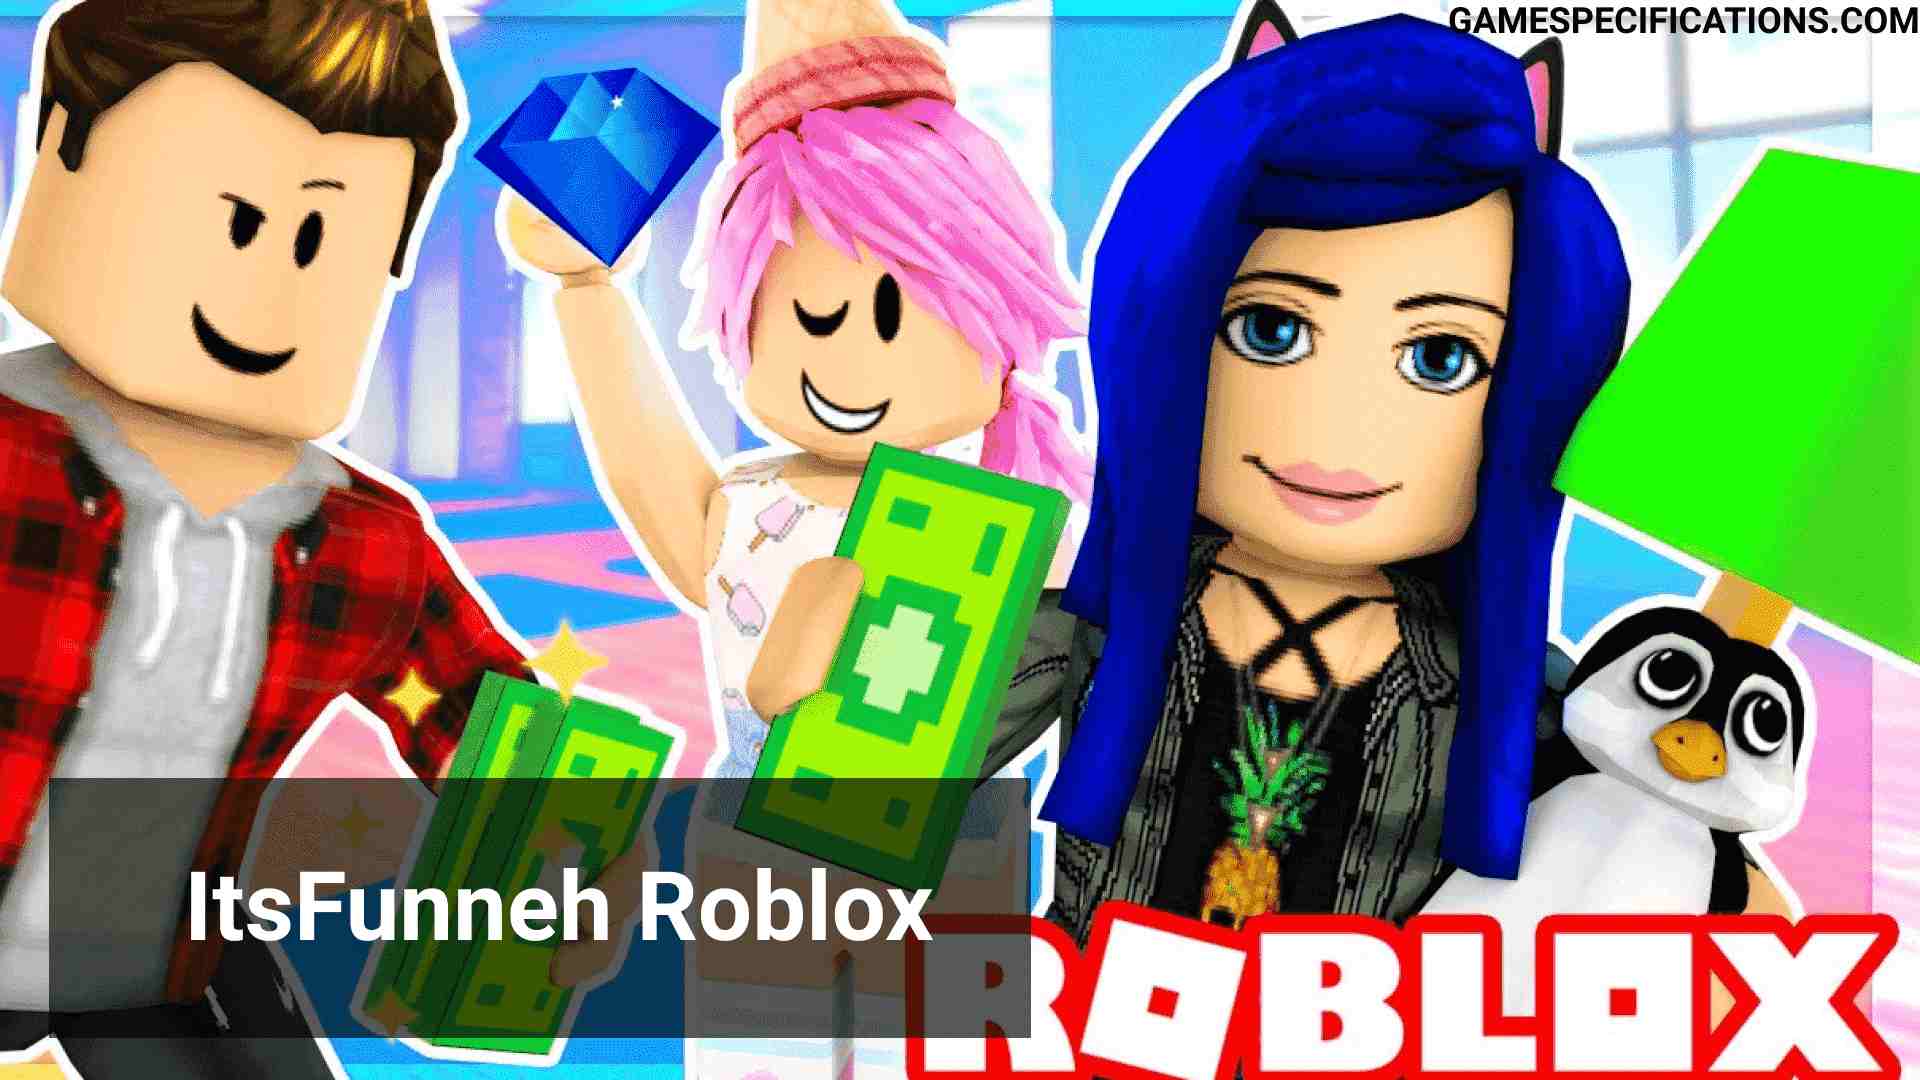 Itsfunneh Roblox Legendary Top Videos Game Specifications - itsfunneh roblox character